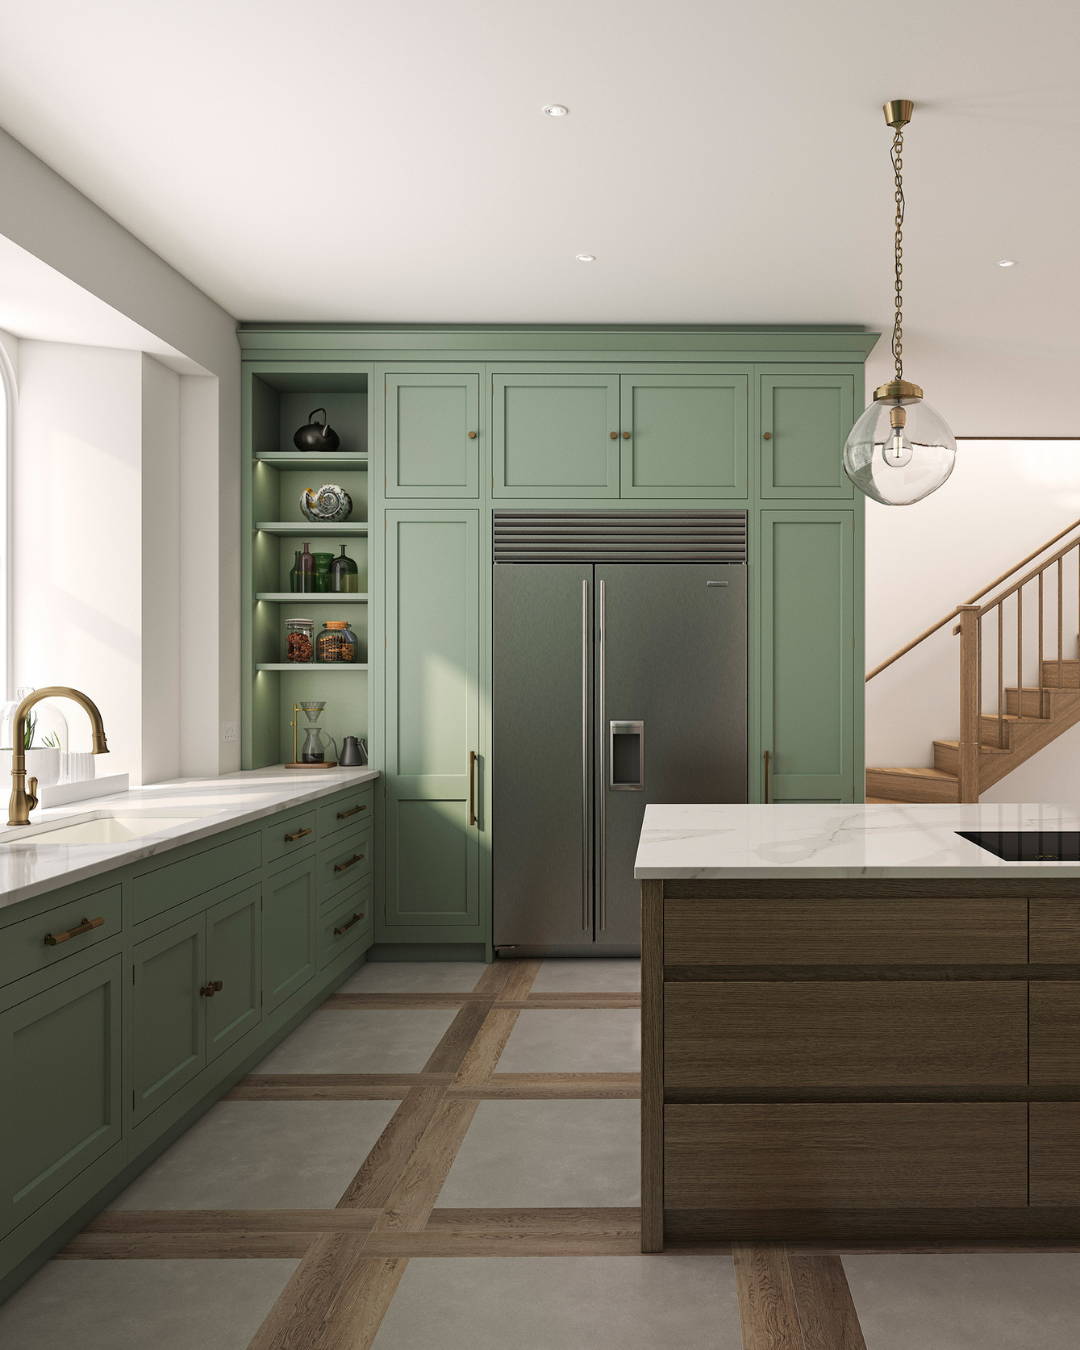 Sage green kitchens to add to your moodboard